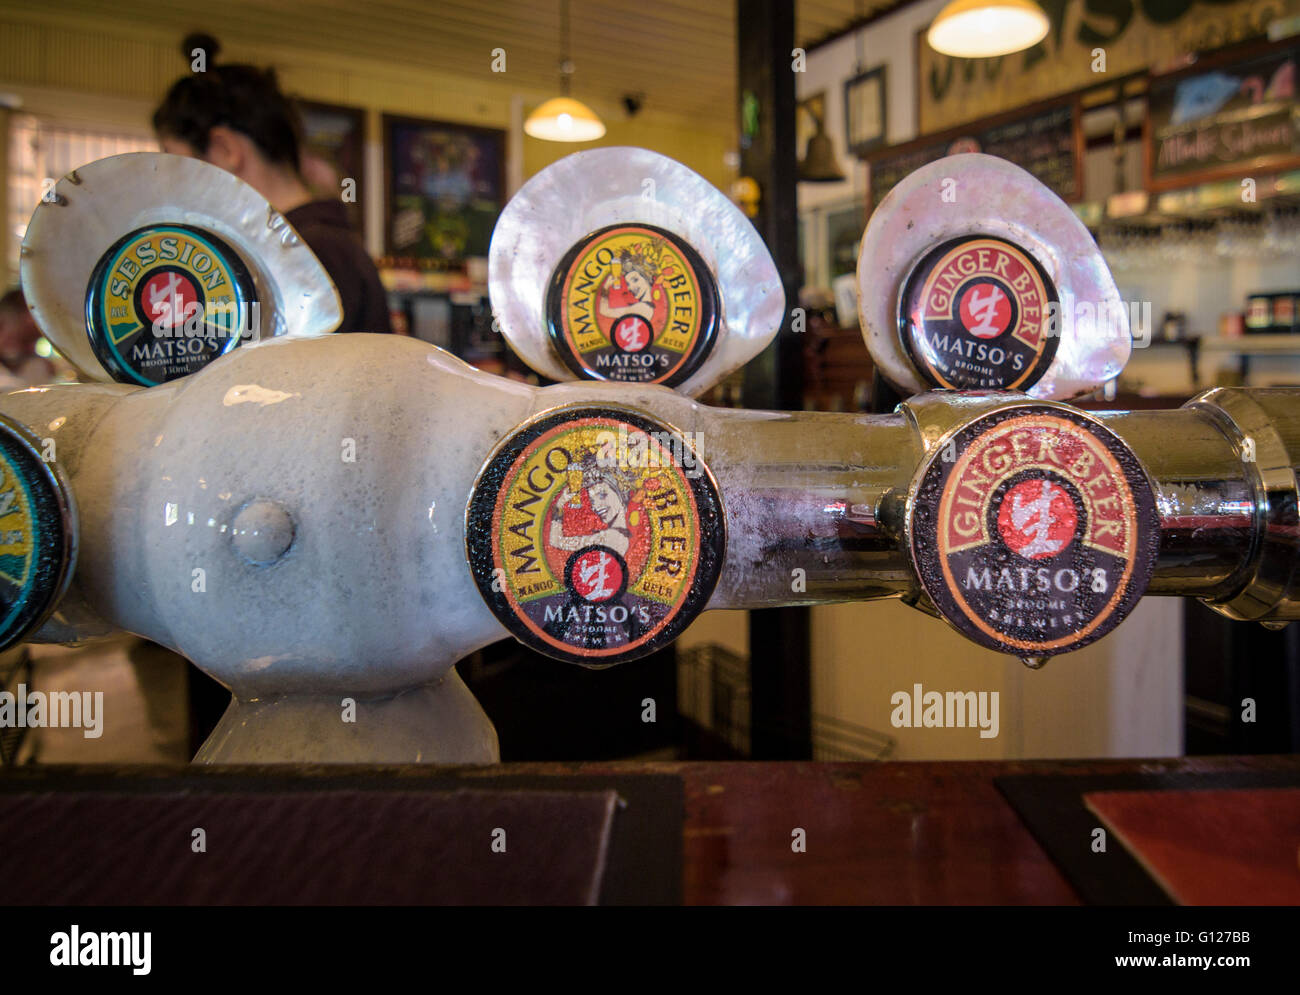 Detail of Matso's specialty beers taps at Matso's Broome Brewery, Broome, Kimberley, Western Australia Stock Photo